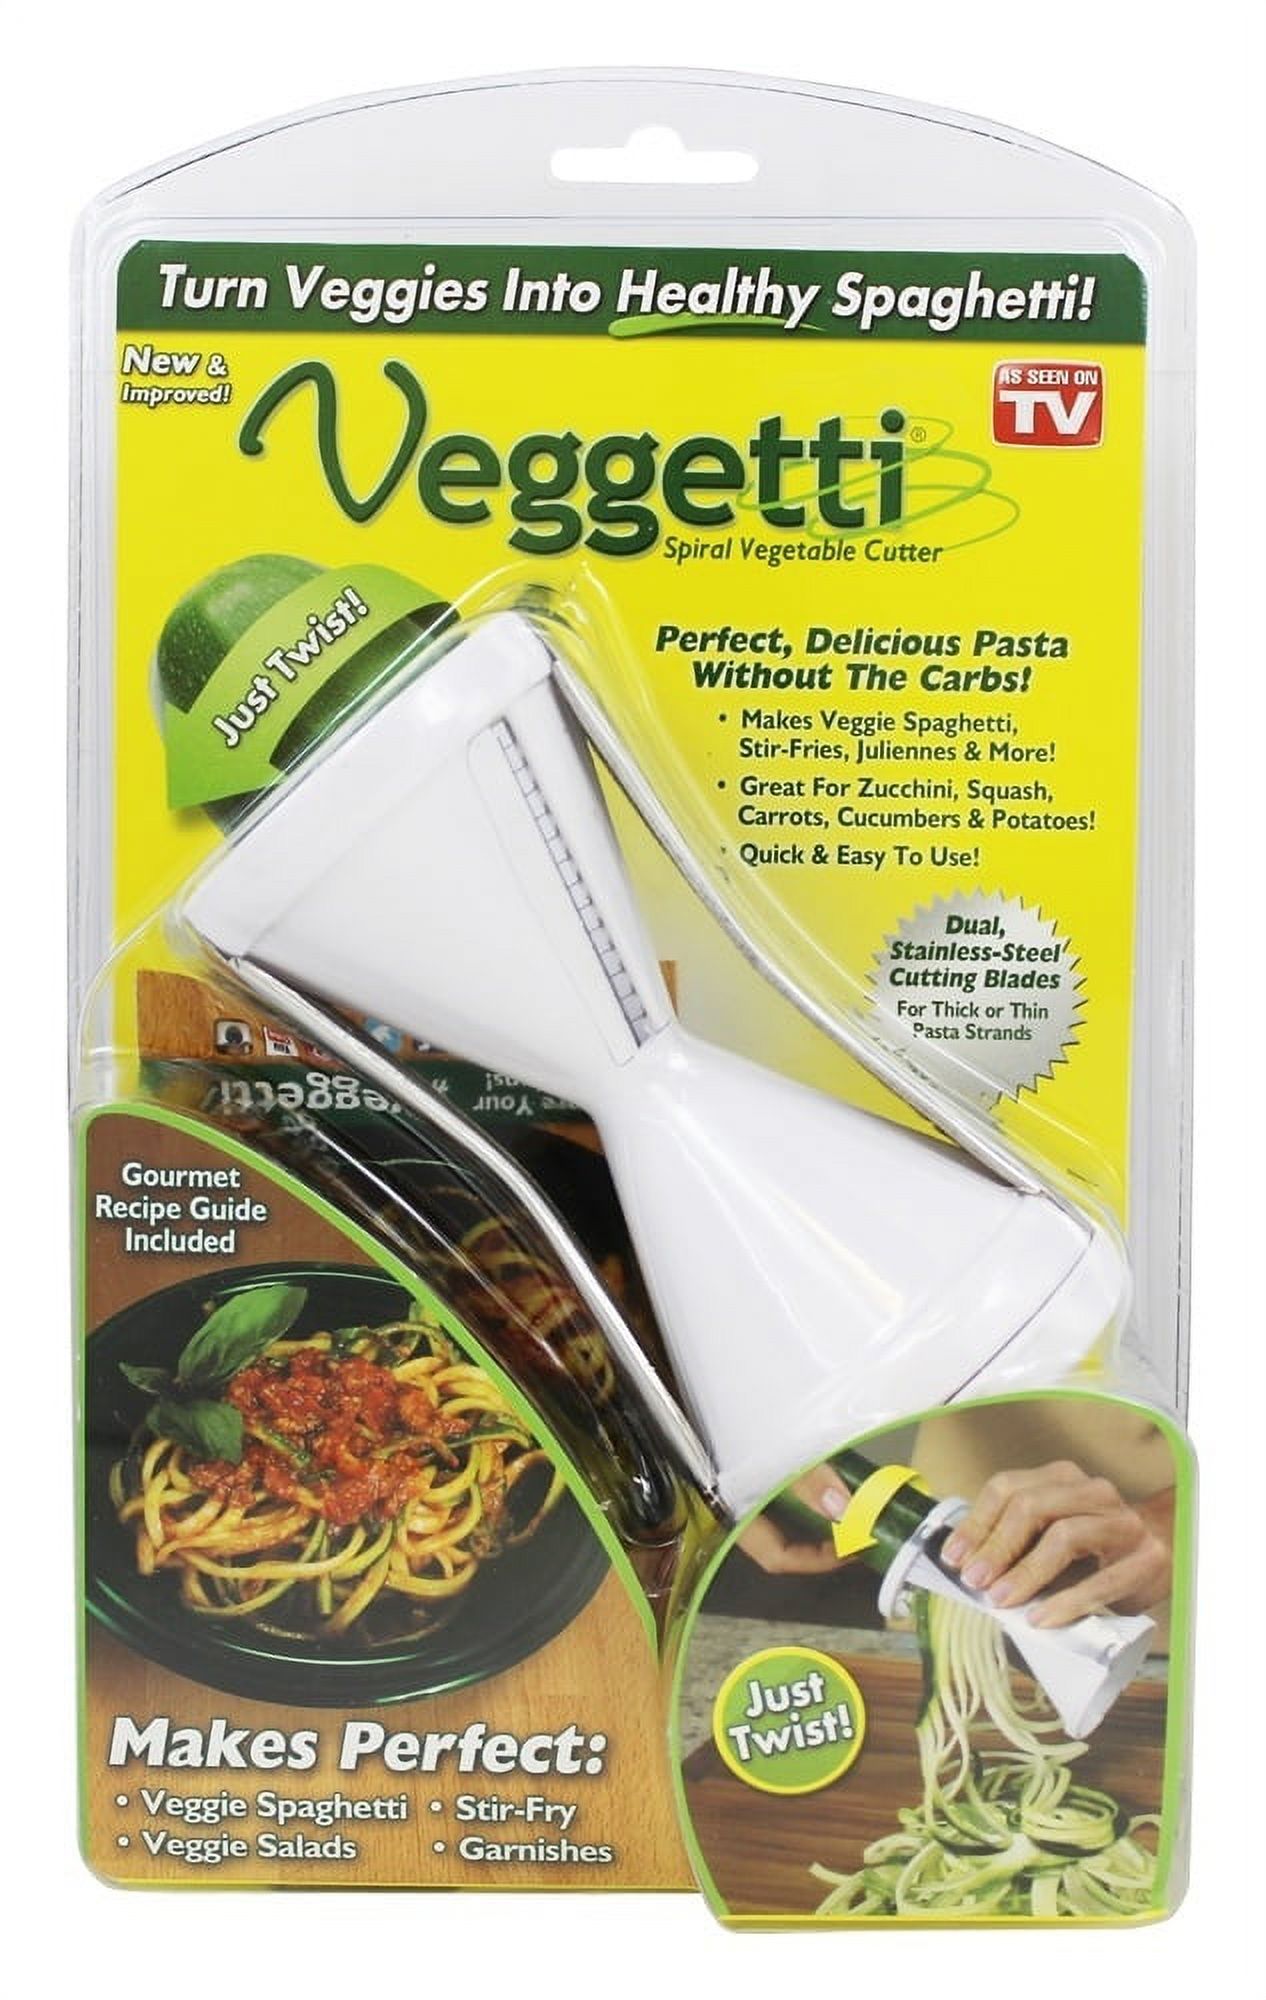 Ontel Veggetti Power - 4-in-1 Electric Spiralizer - As Seen on TV - image 1 of 2